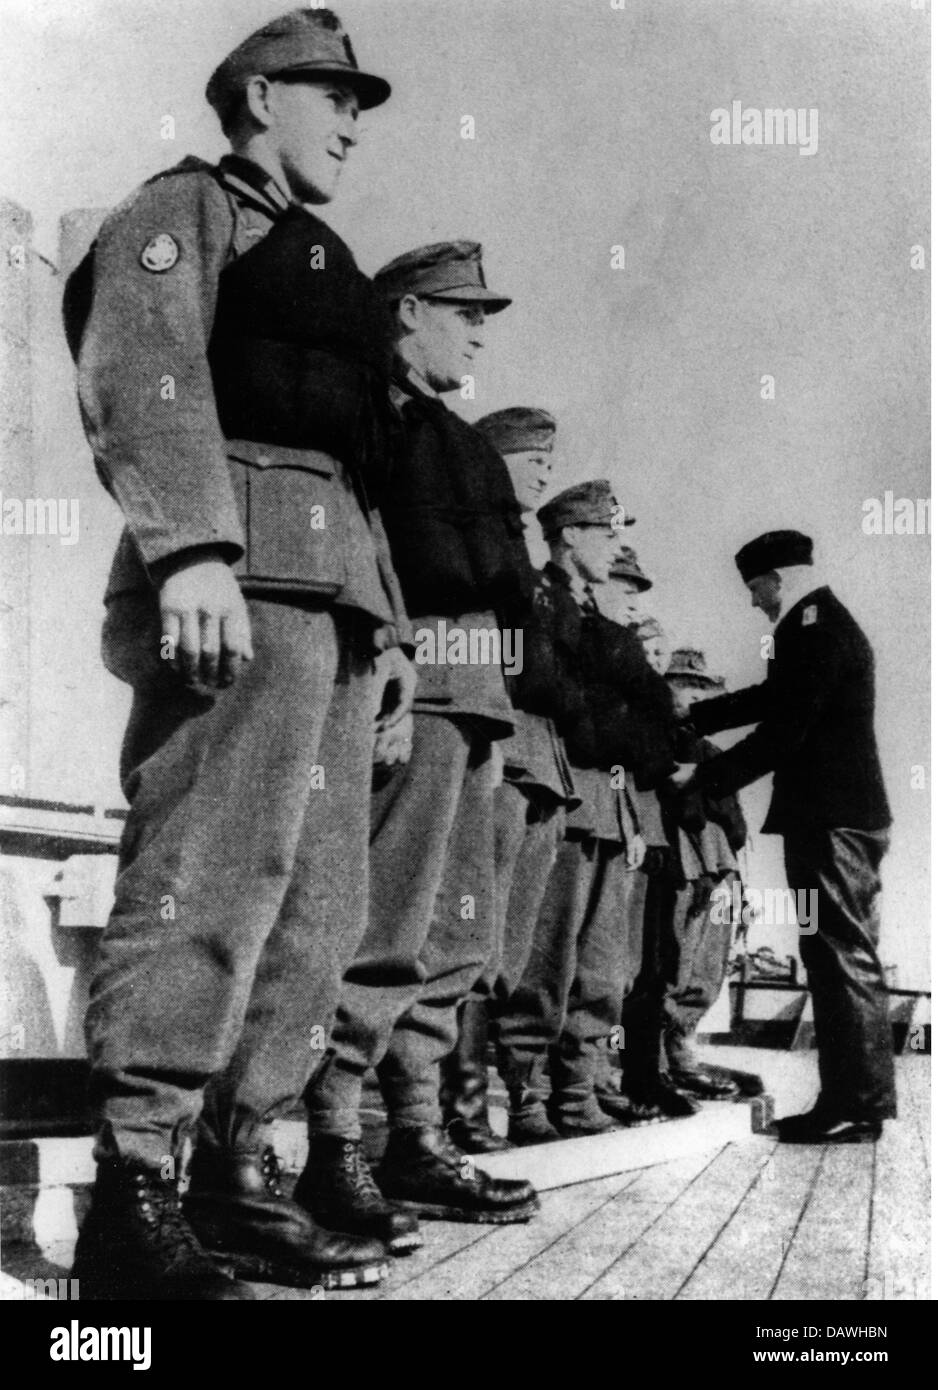 events, Second World War / WWII, Norway, embarkation of German soldiers for the deployment in Norway, members of the 3rd Gebirgsdivision (mountain infantry division) on board of a warship, early April 1940, examination, Additional-Rights-Clearences-Not Available Stock Photo